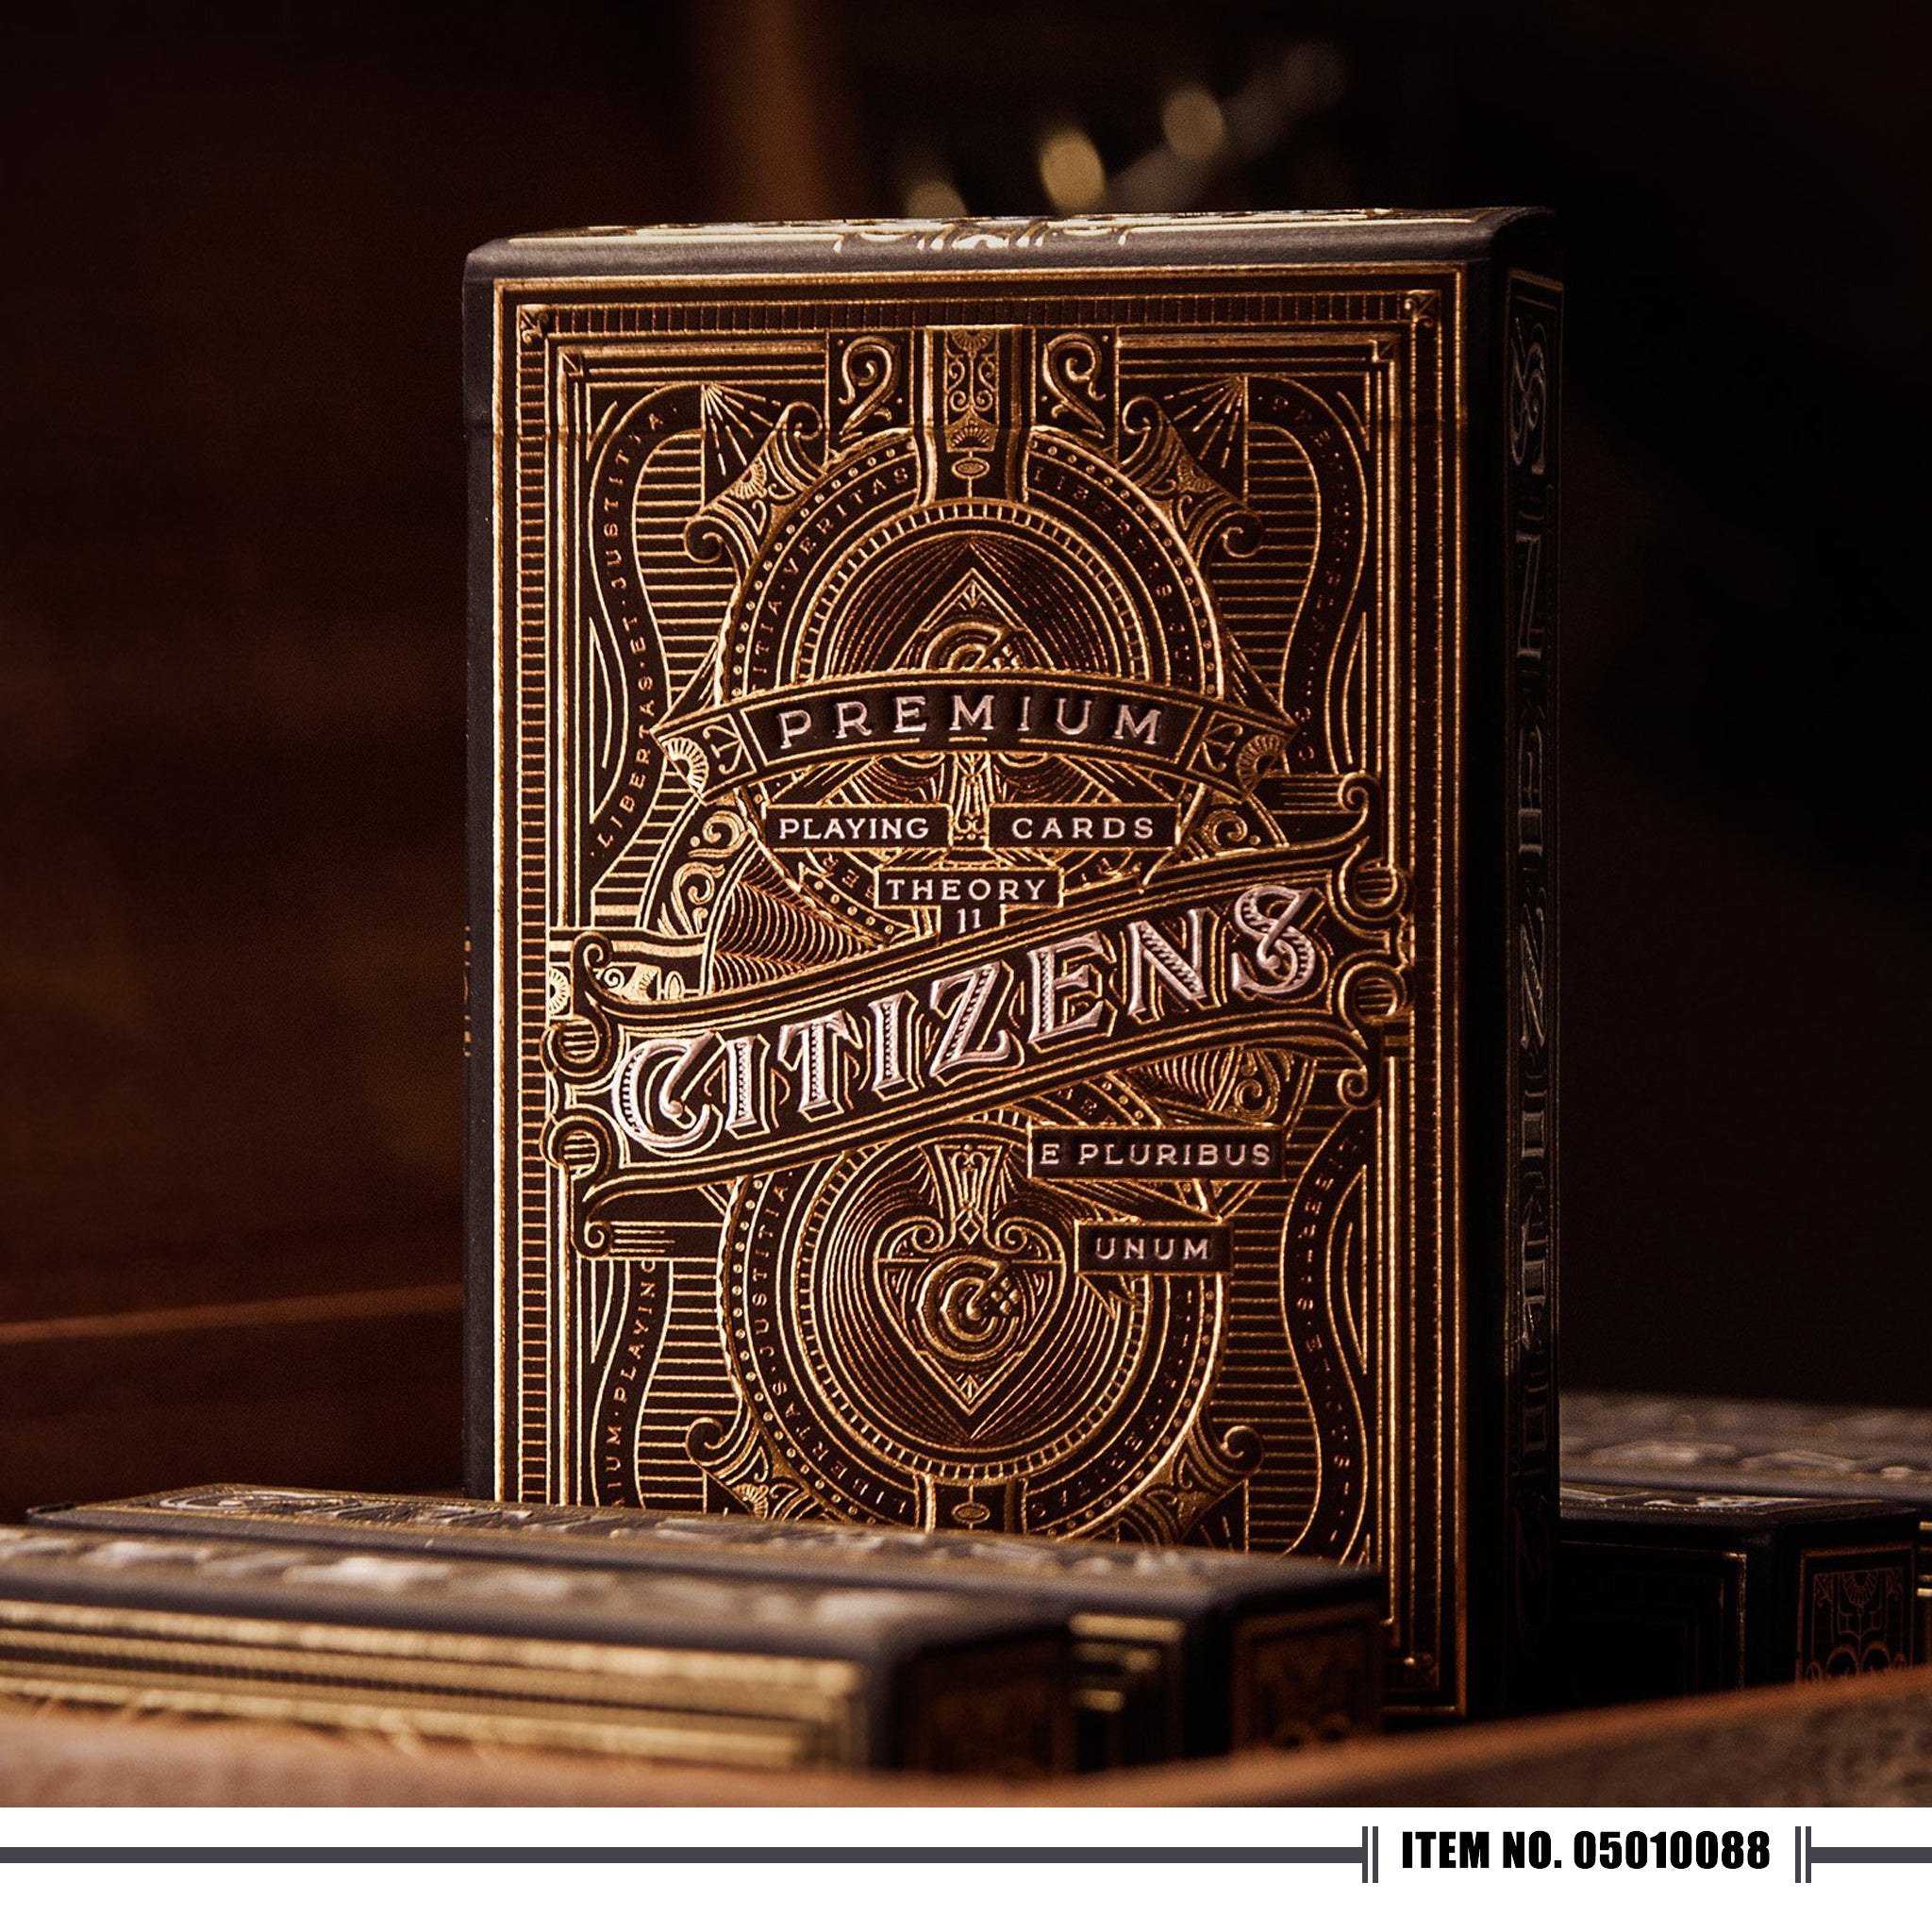 Theory 11 - Citizens Playing Cards